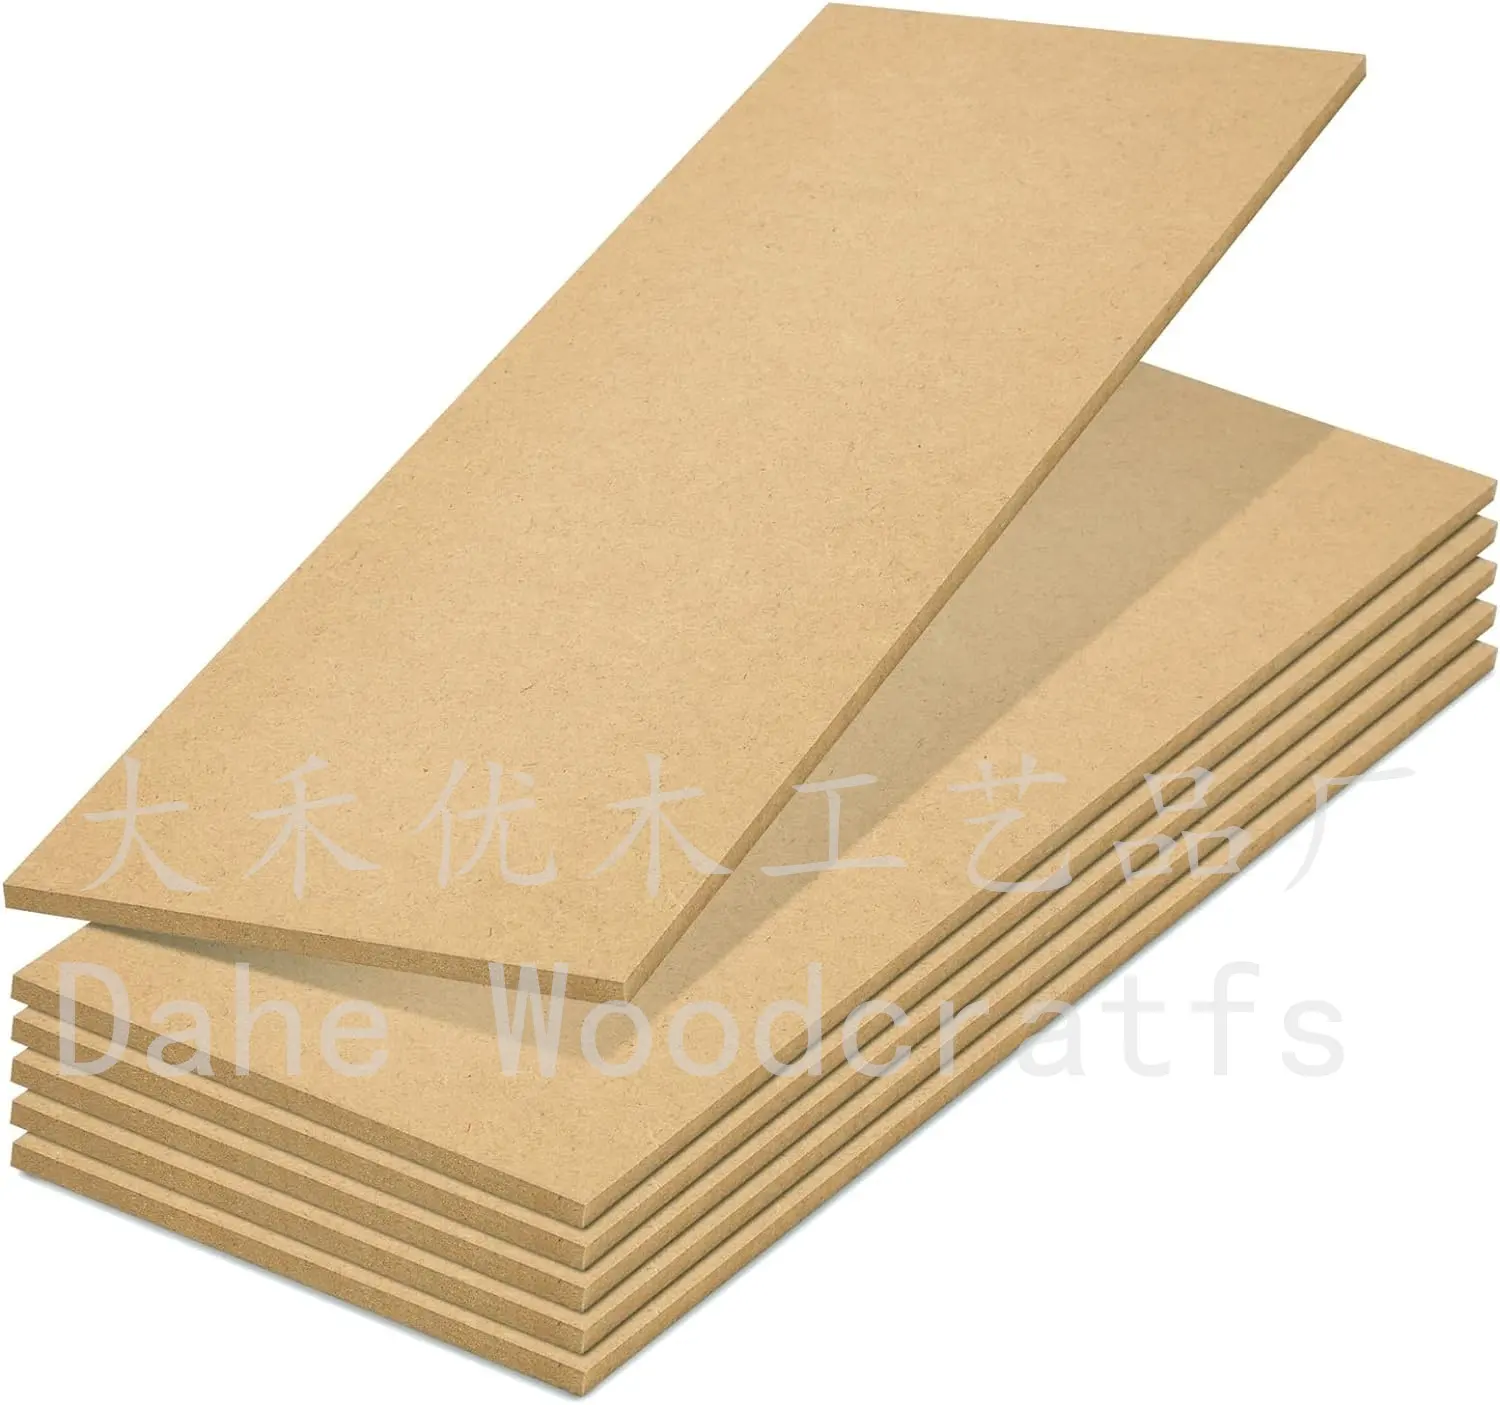 5*15 in Unfinished MDF Wood Planks for Crafts Wall Decoration Art Classes Carpentry Painting